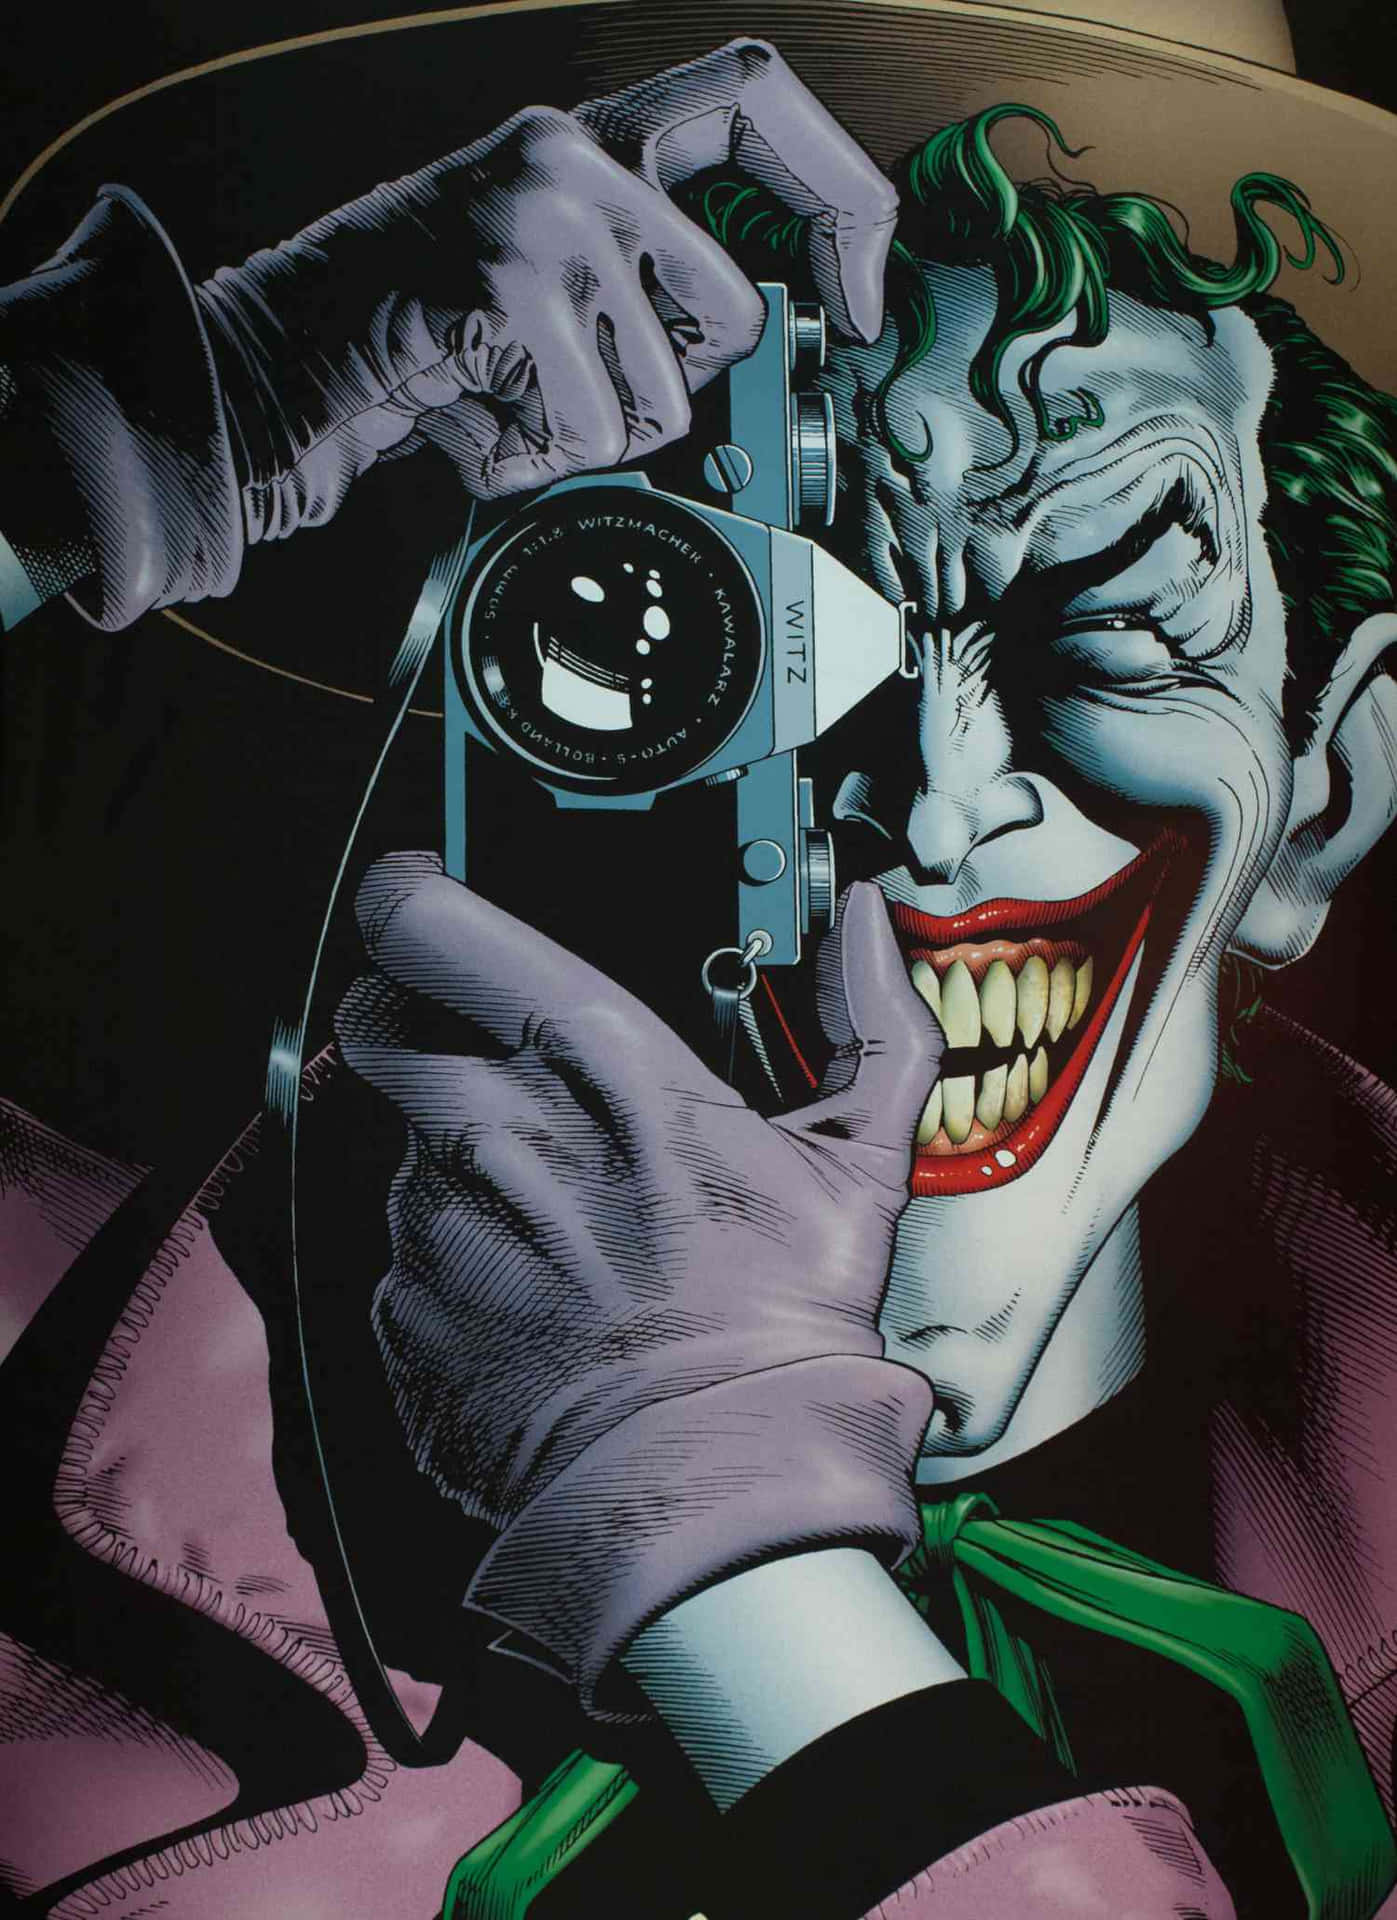 "Why so serious?" - The Joker